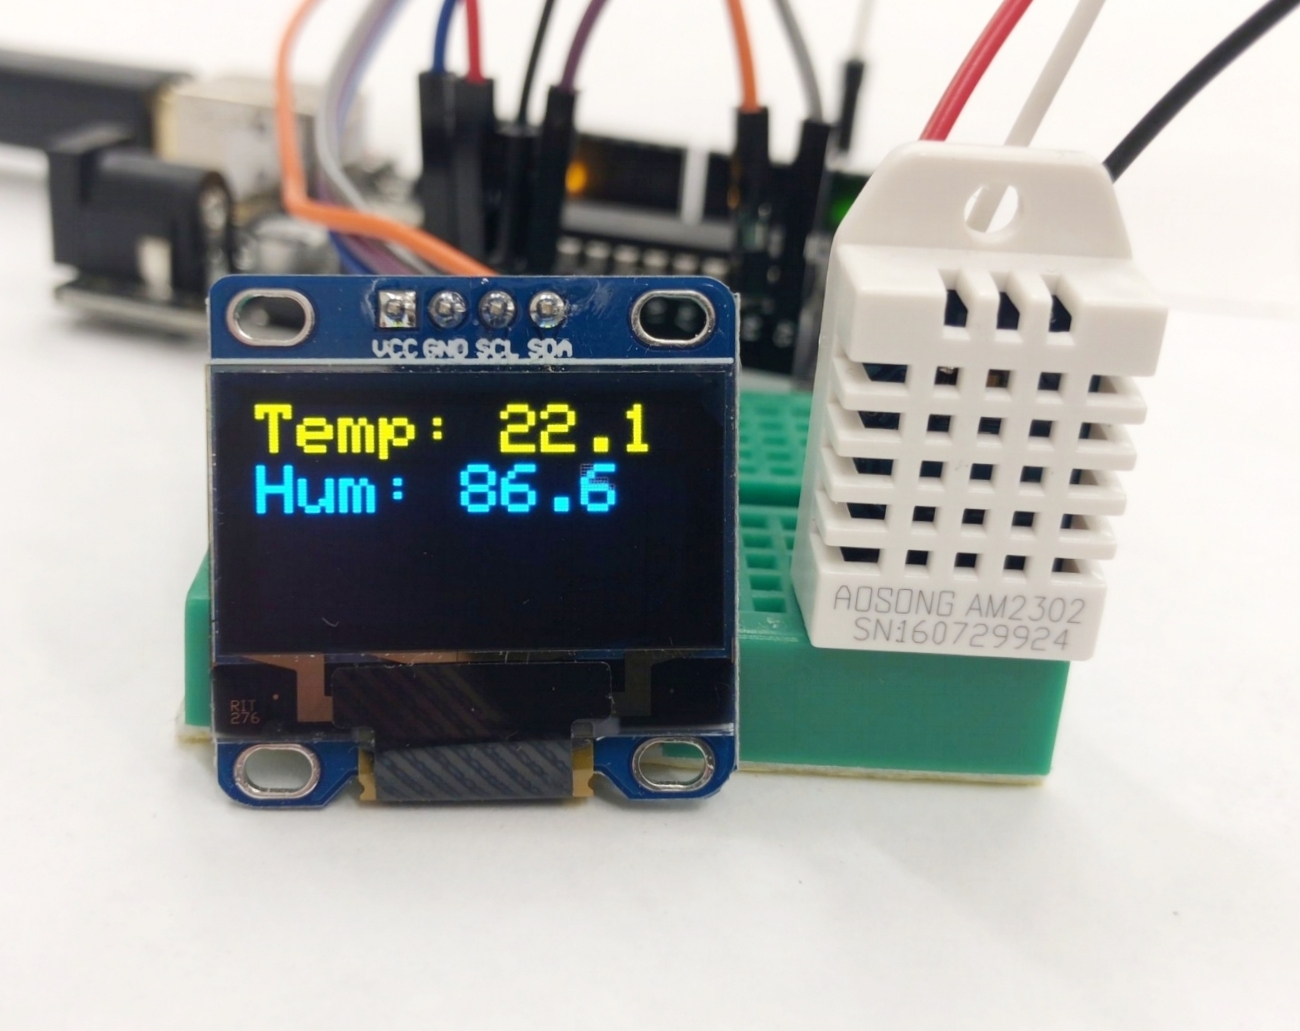 Arduino I2c Oled Display Temperature And Humidity Display Ssd1306 — Maker Portal 5141